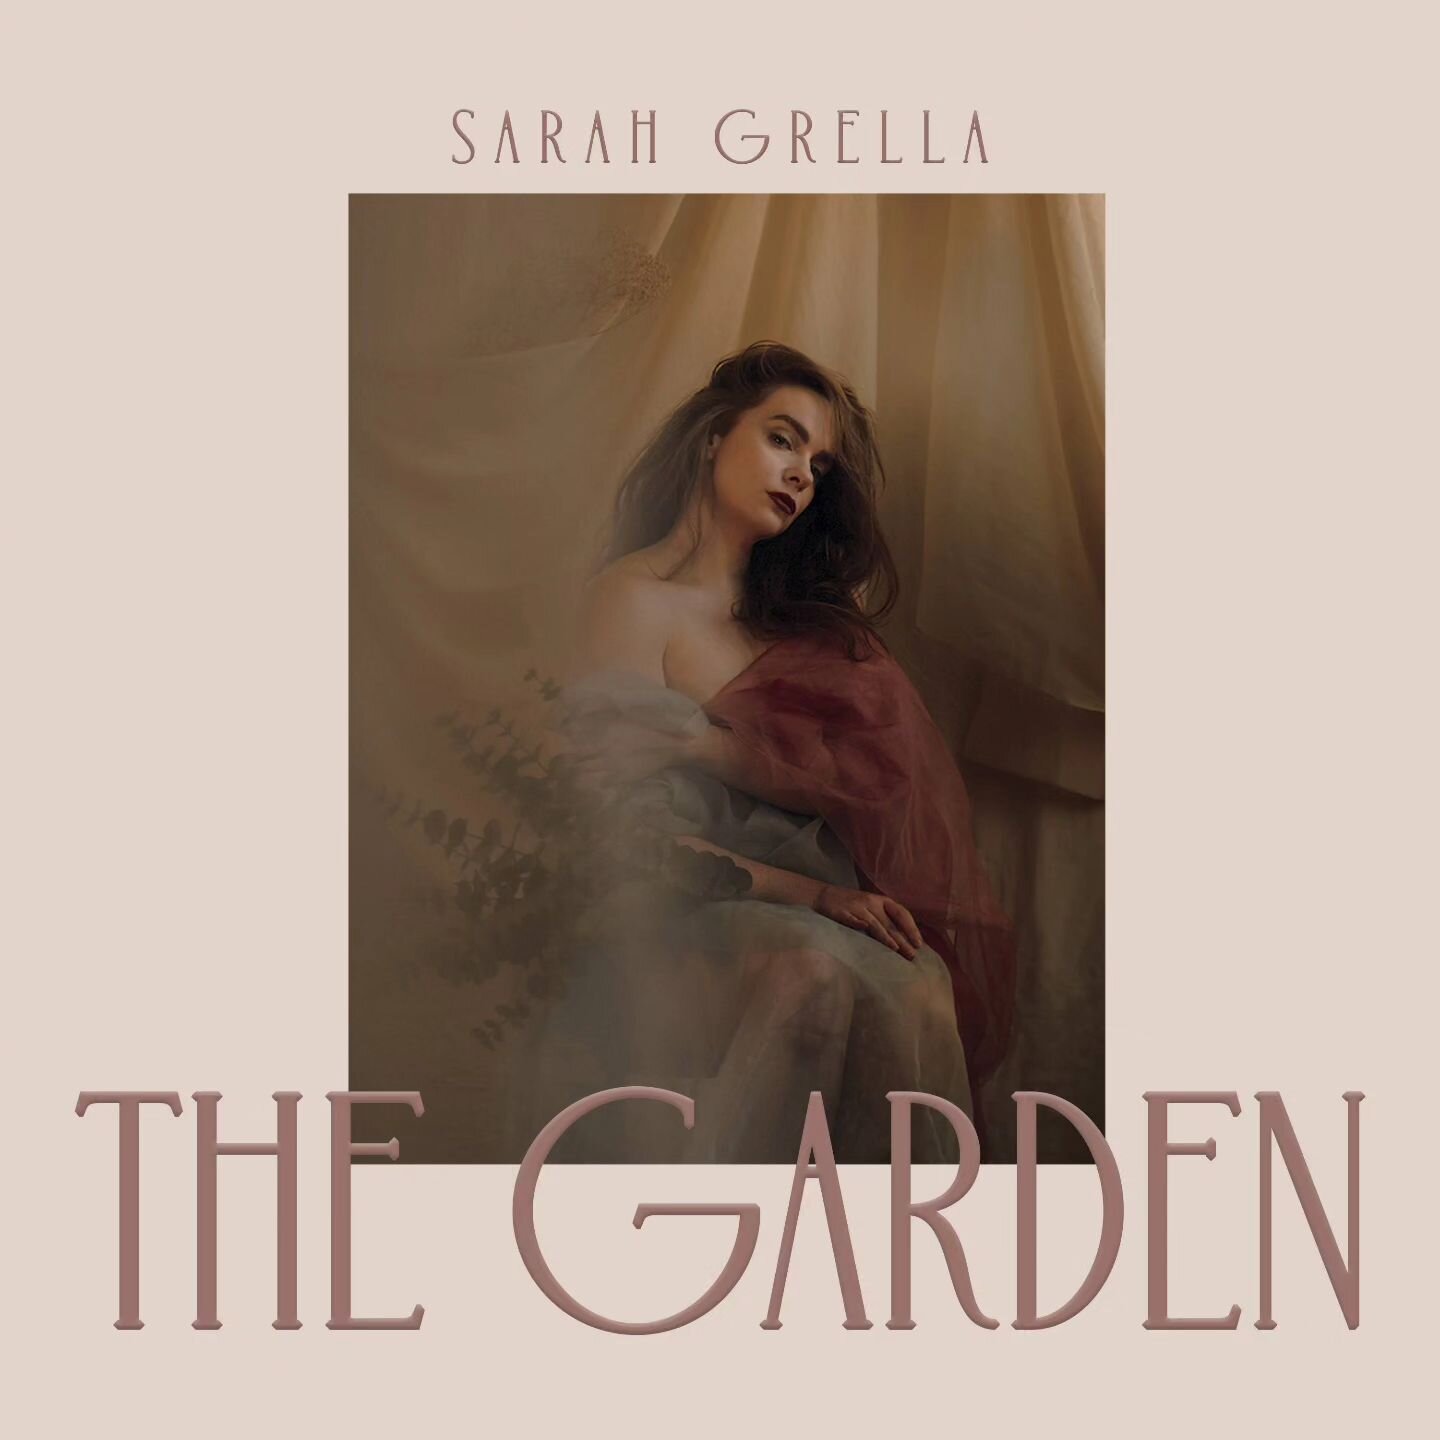 It's been one whole month since The Garden was released into the world, and my what a month it has been.

At the end of April we were notified by the landlord that we had 30 days to vacate the apartment that had been my home for the last five years.
